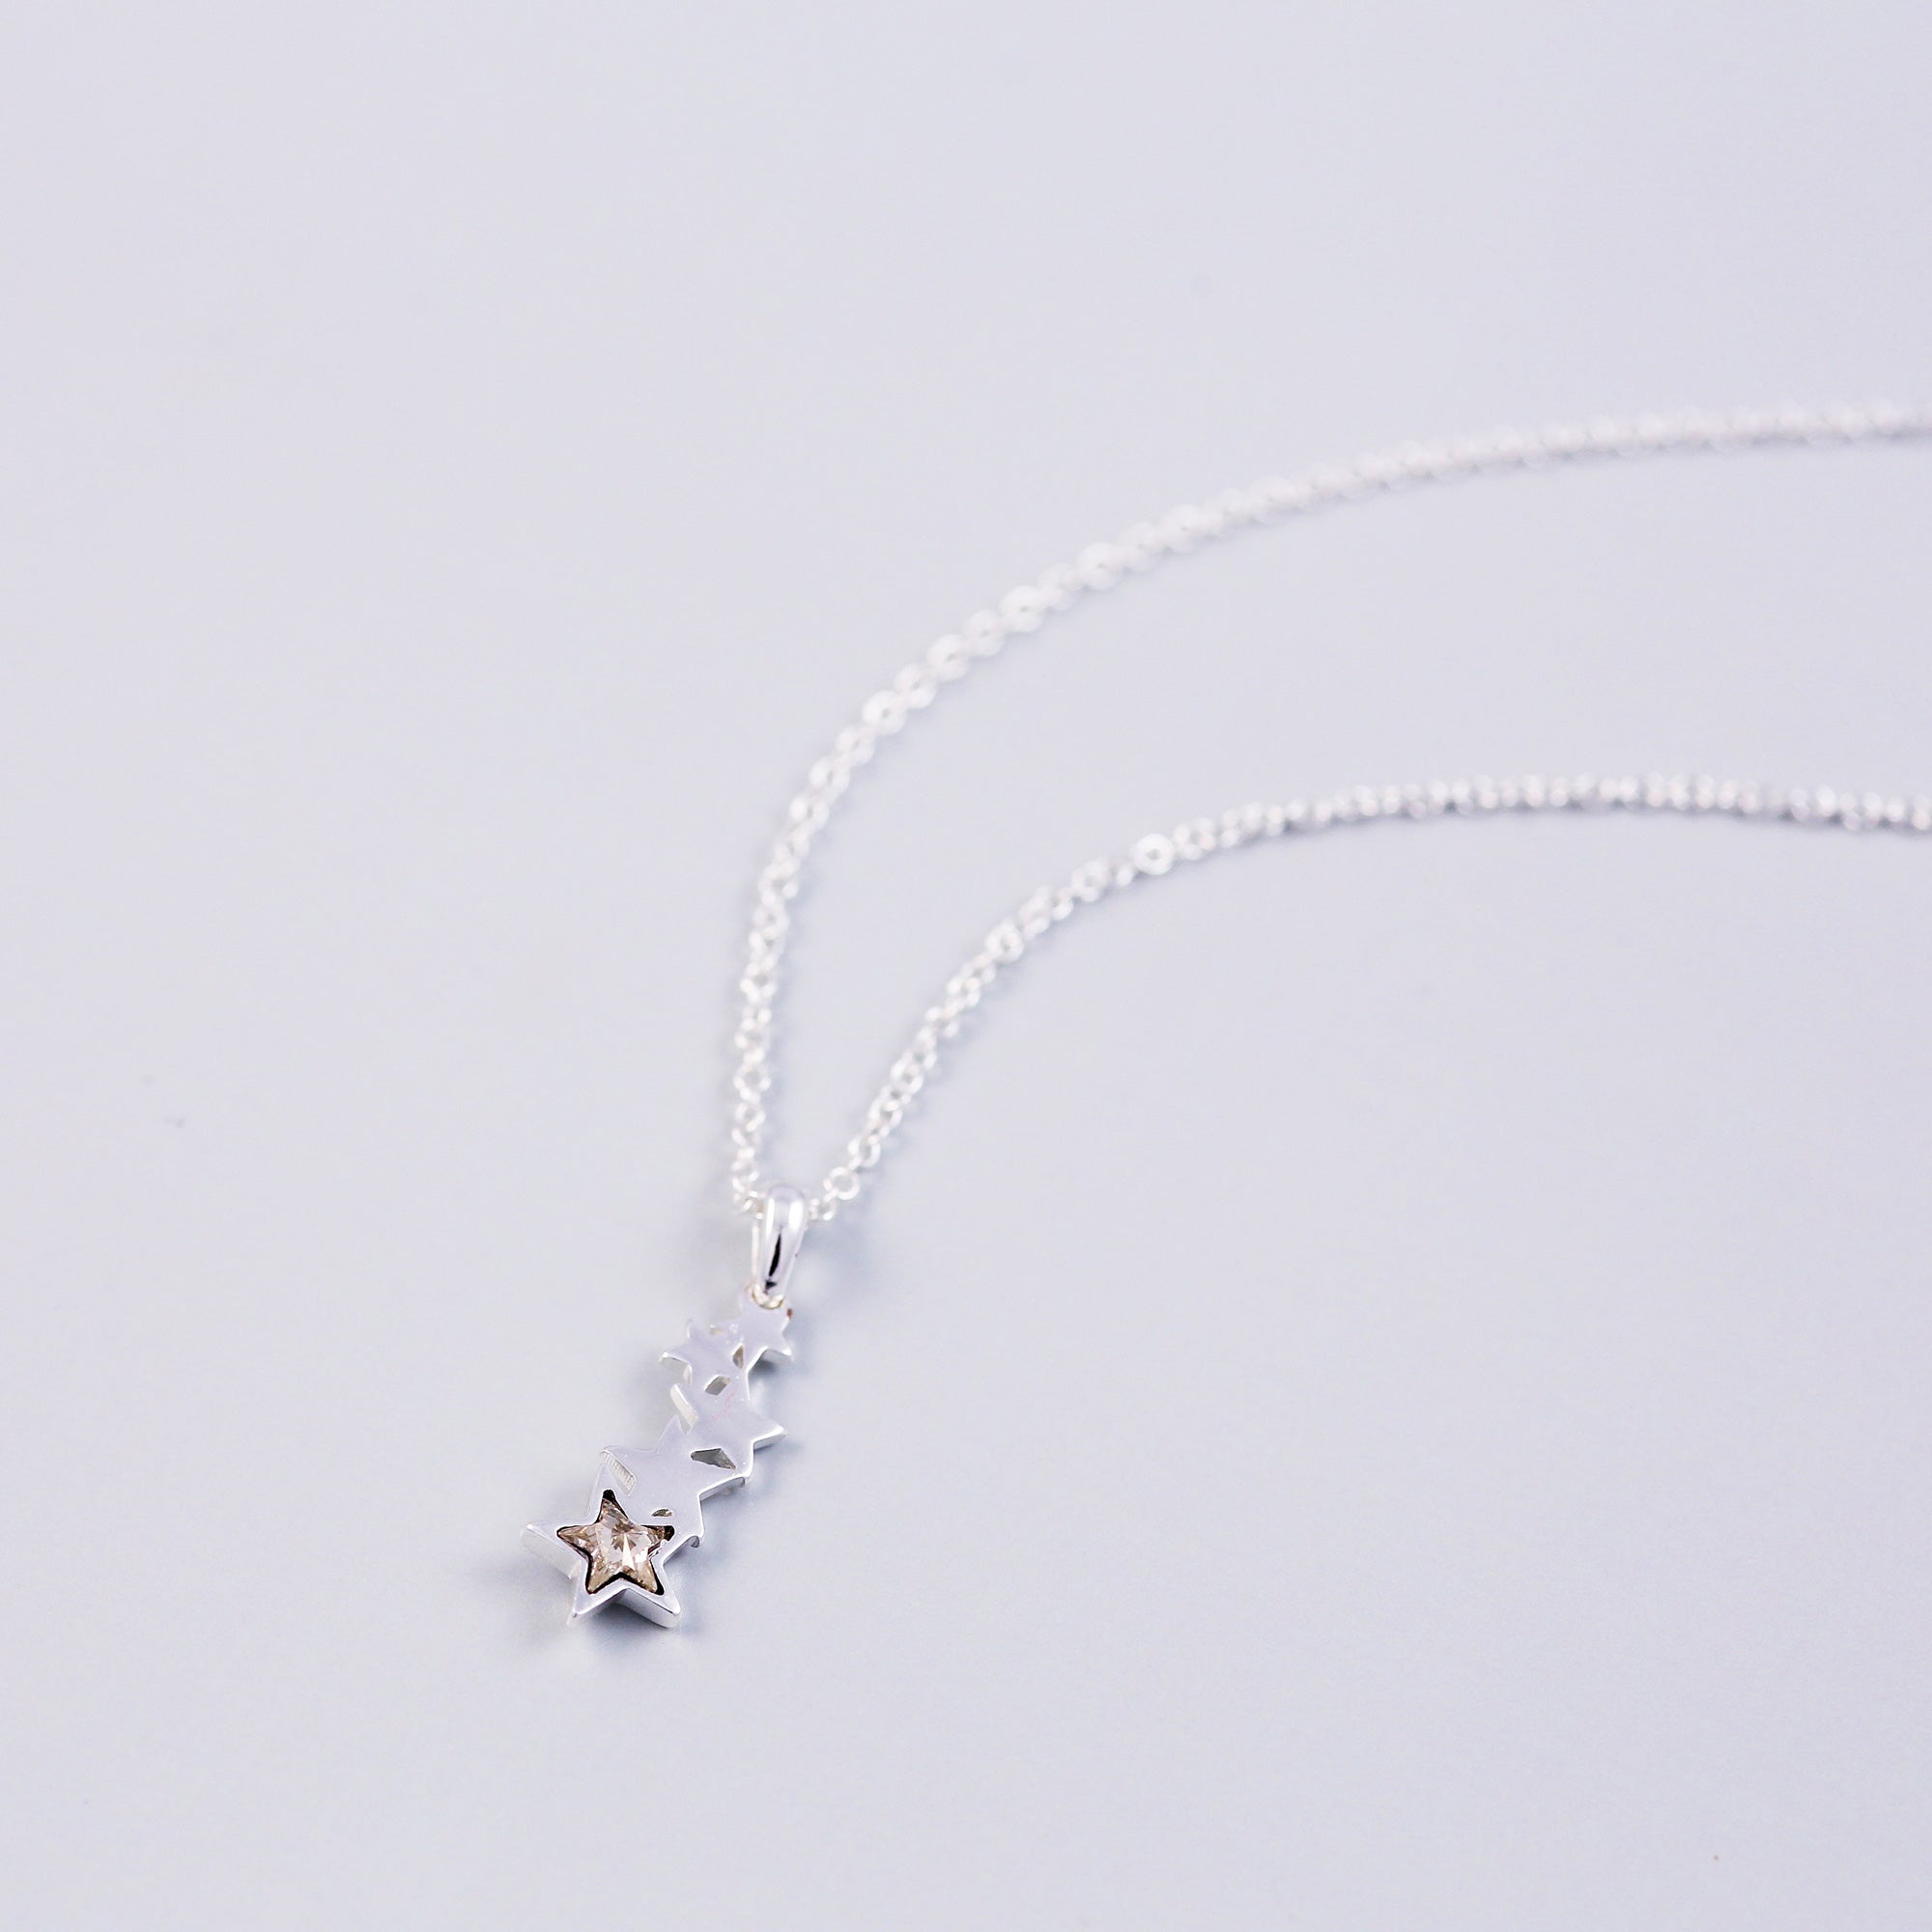 Buy Shooting Star Necklace Online in India - Etsy